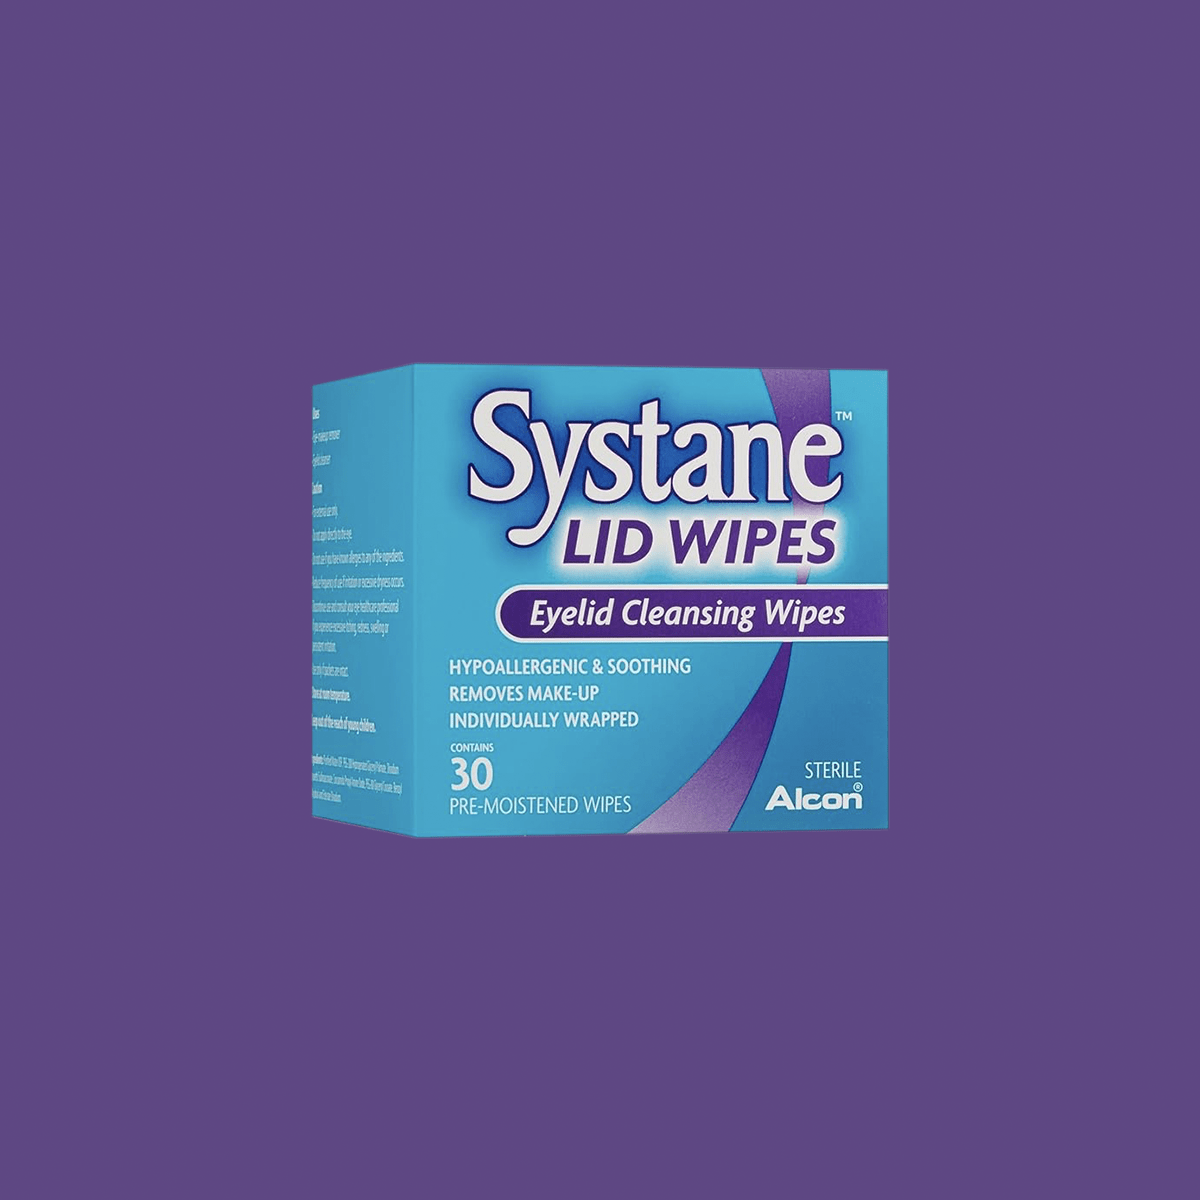 Systane Lid Wipes Eyelid Cleansing, Hypoallergenic, Make-up Remover Wipes, (30 Count) - Dryeye Rescue